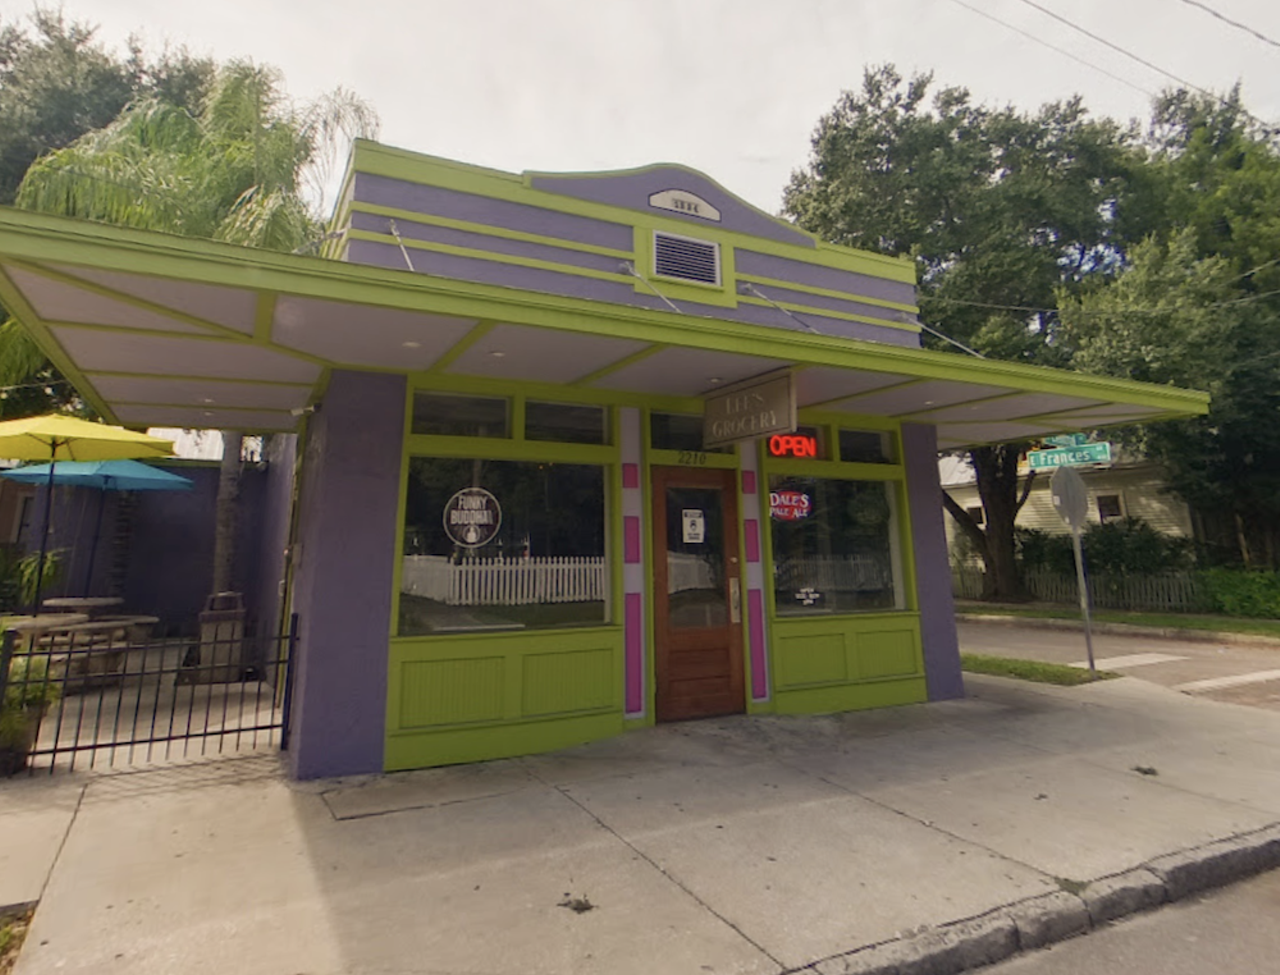 Lee’s Grocery (6.3)2210 N Central Ave., TampaLee’s is a Tampa Heights favorite for its wings, impressive beer selection and oven-fired pie. Portnoy picked up “hippie vibes” and called the shop a “cult classic pizza place.”Photo by Ray Roa